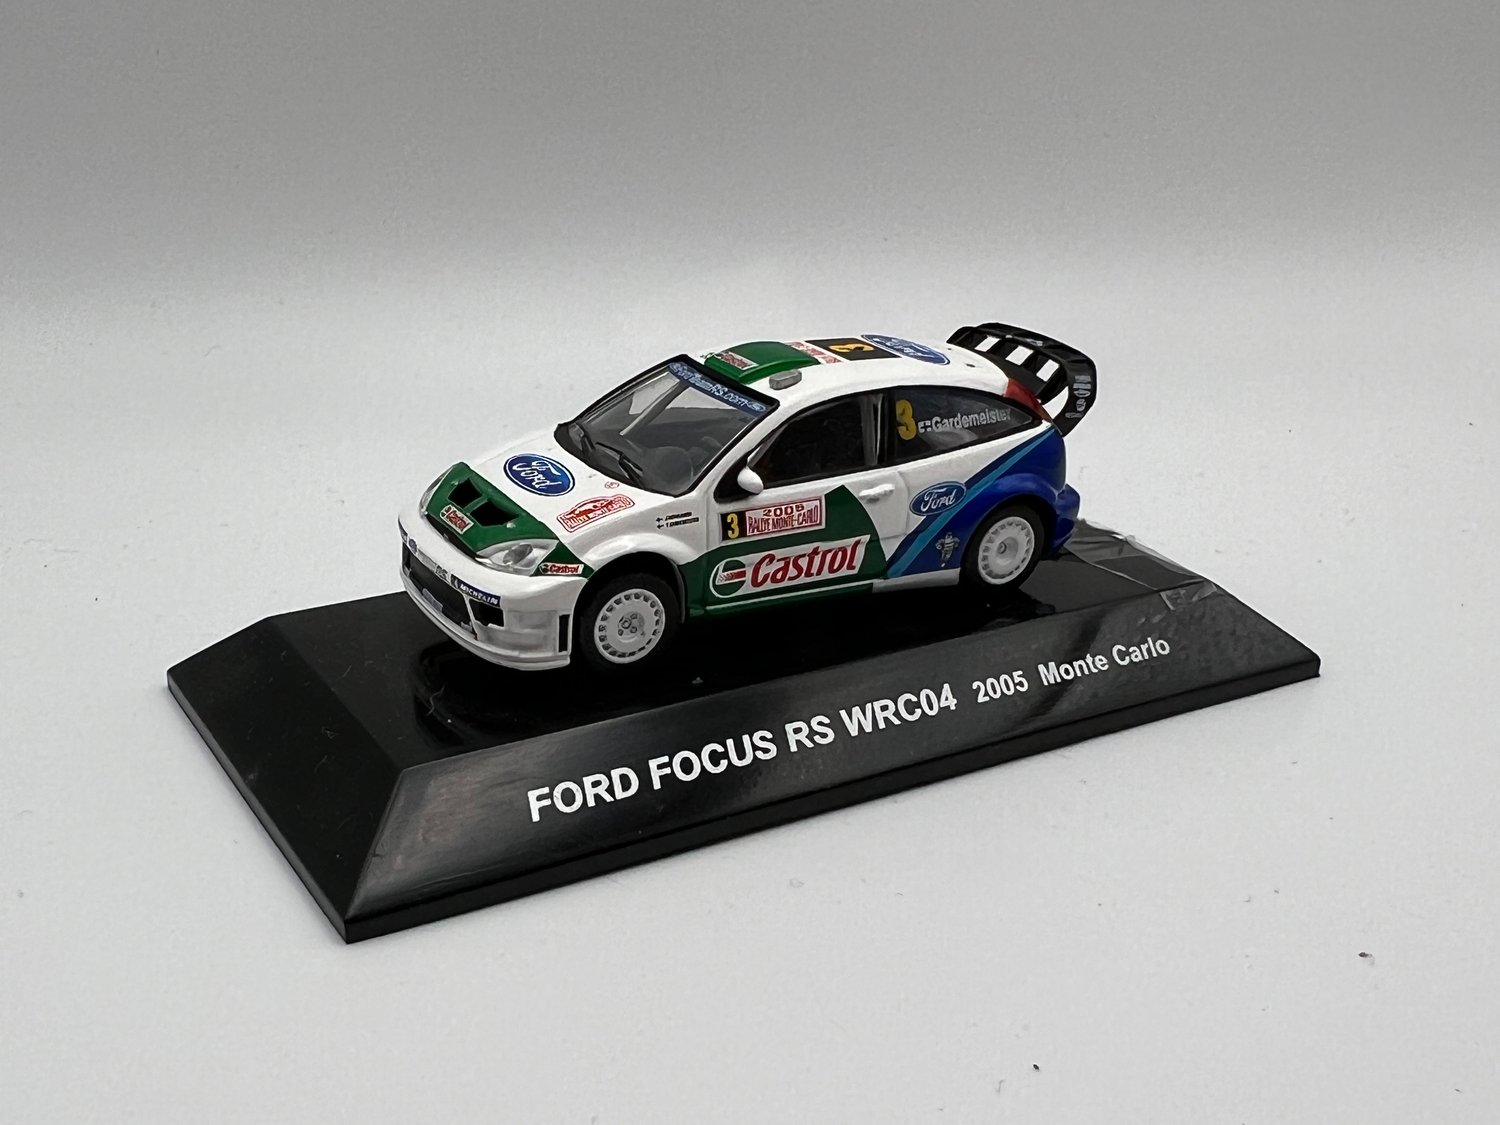 CM's Ford Focus WRC 2005 Monte Carlo Rally 